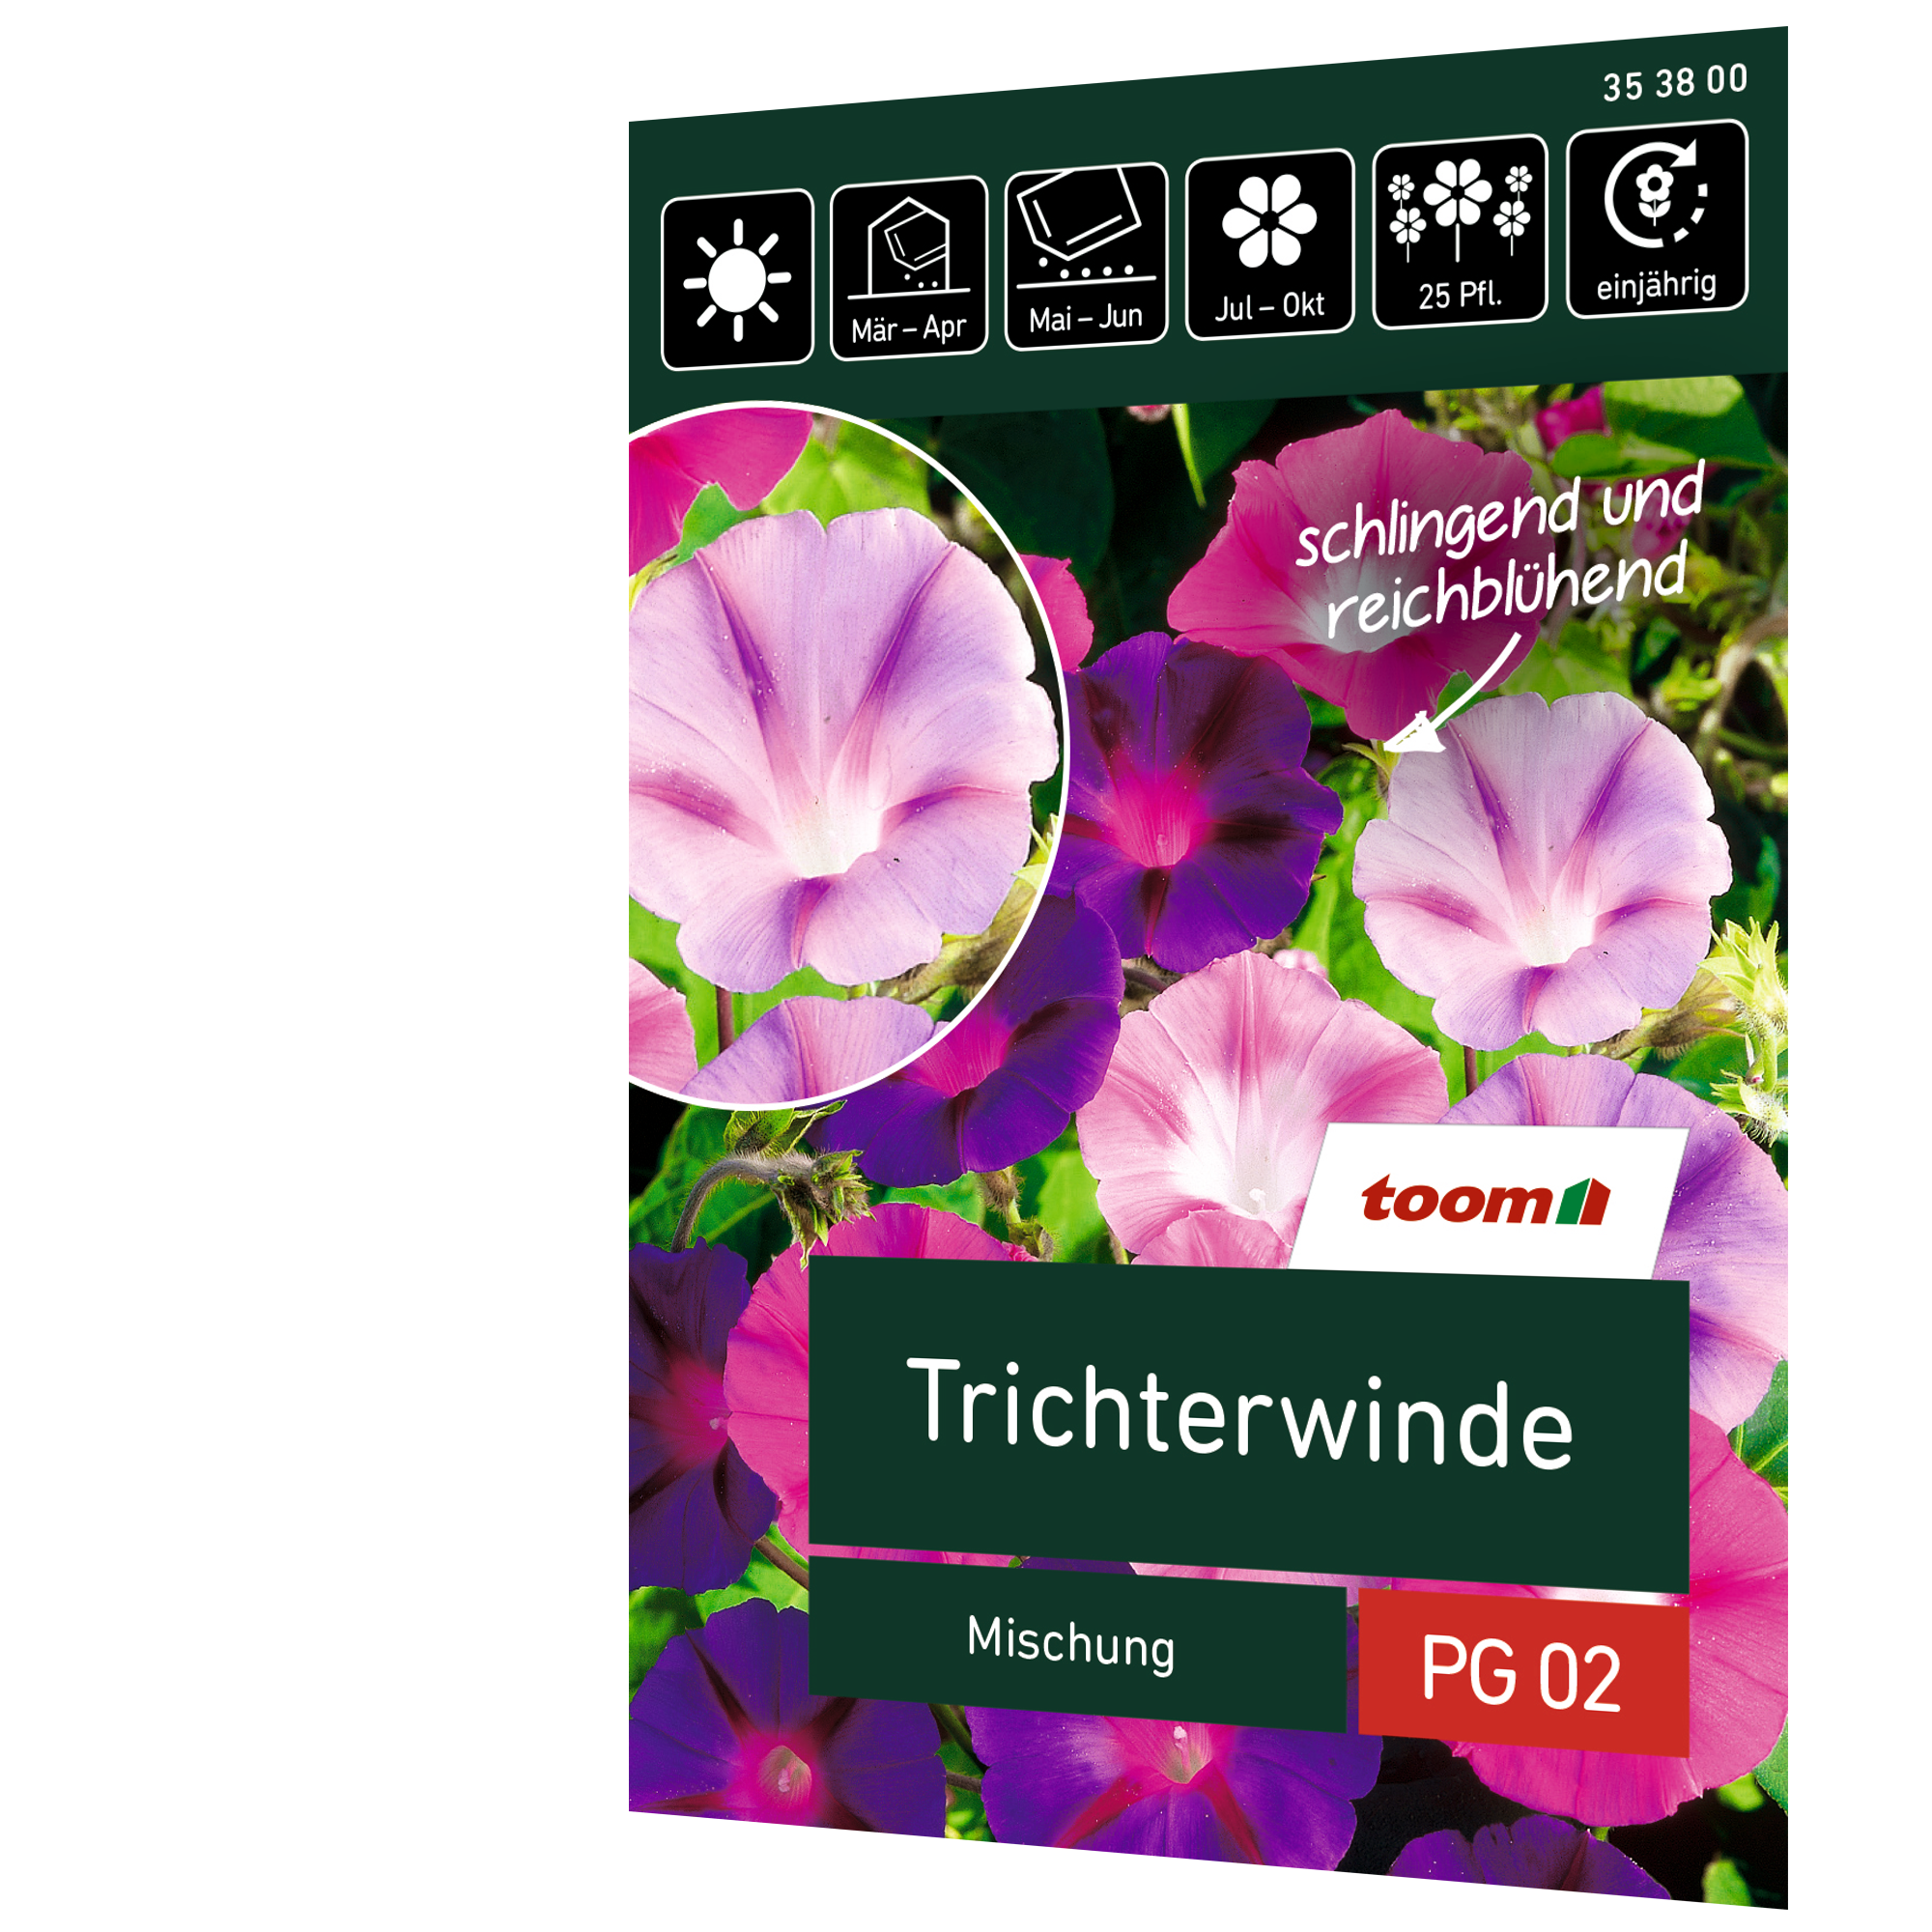 Trichterwinde 'Mischung' + product picture